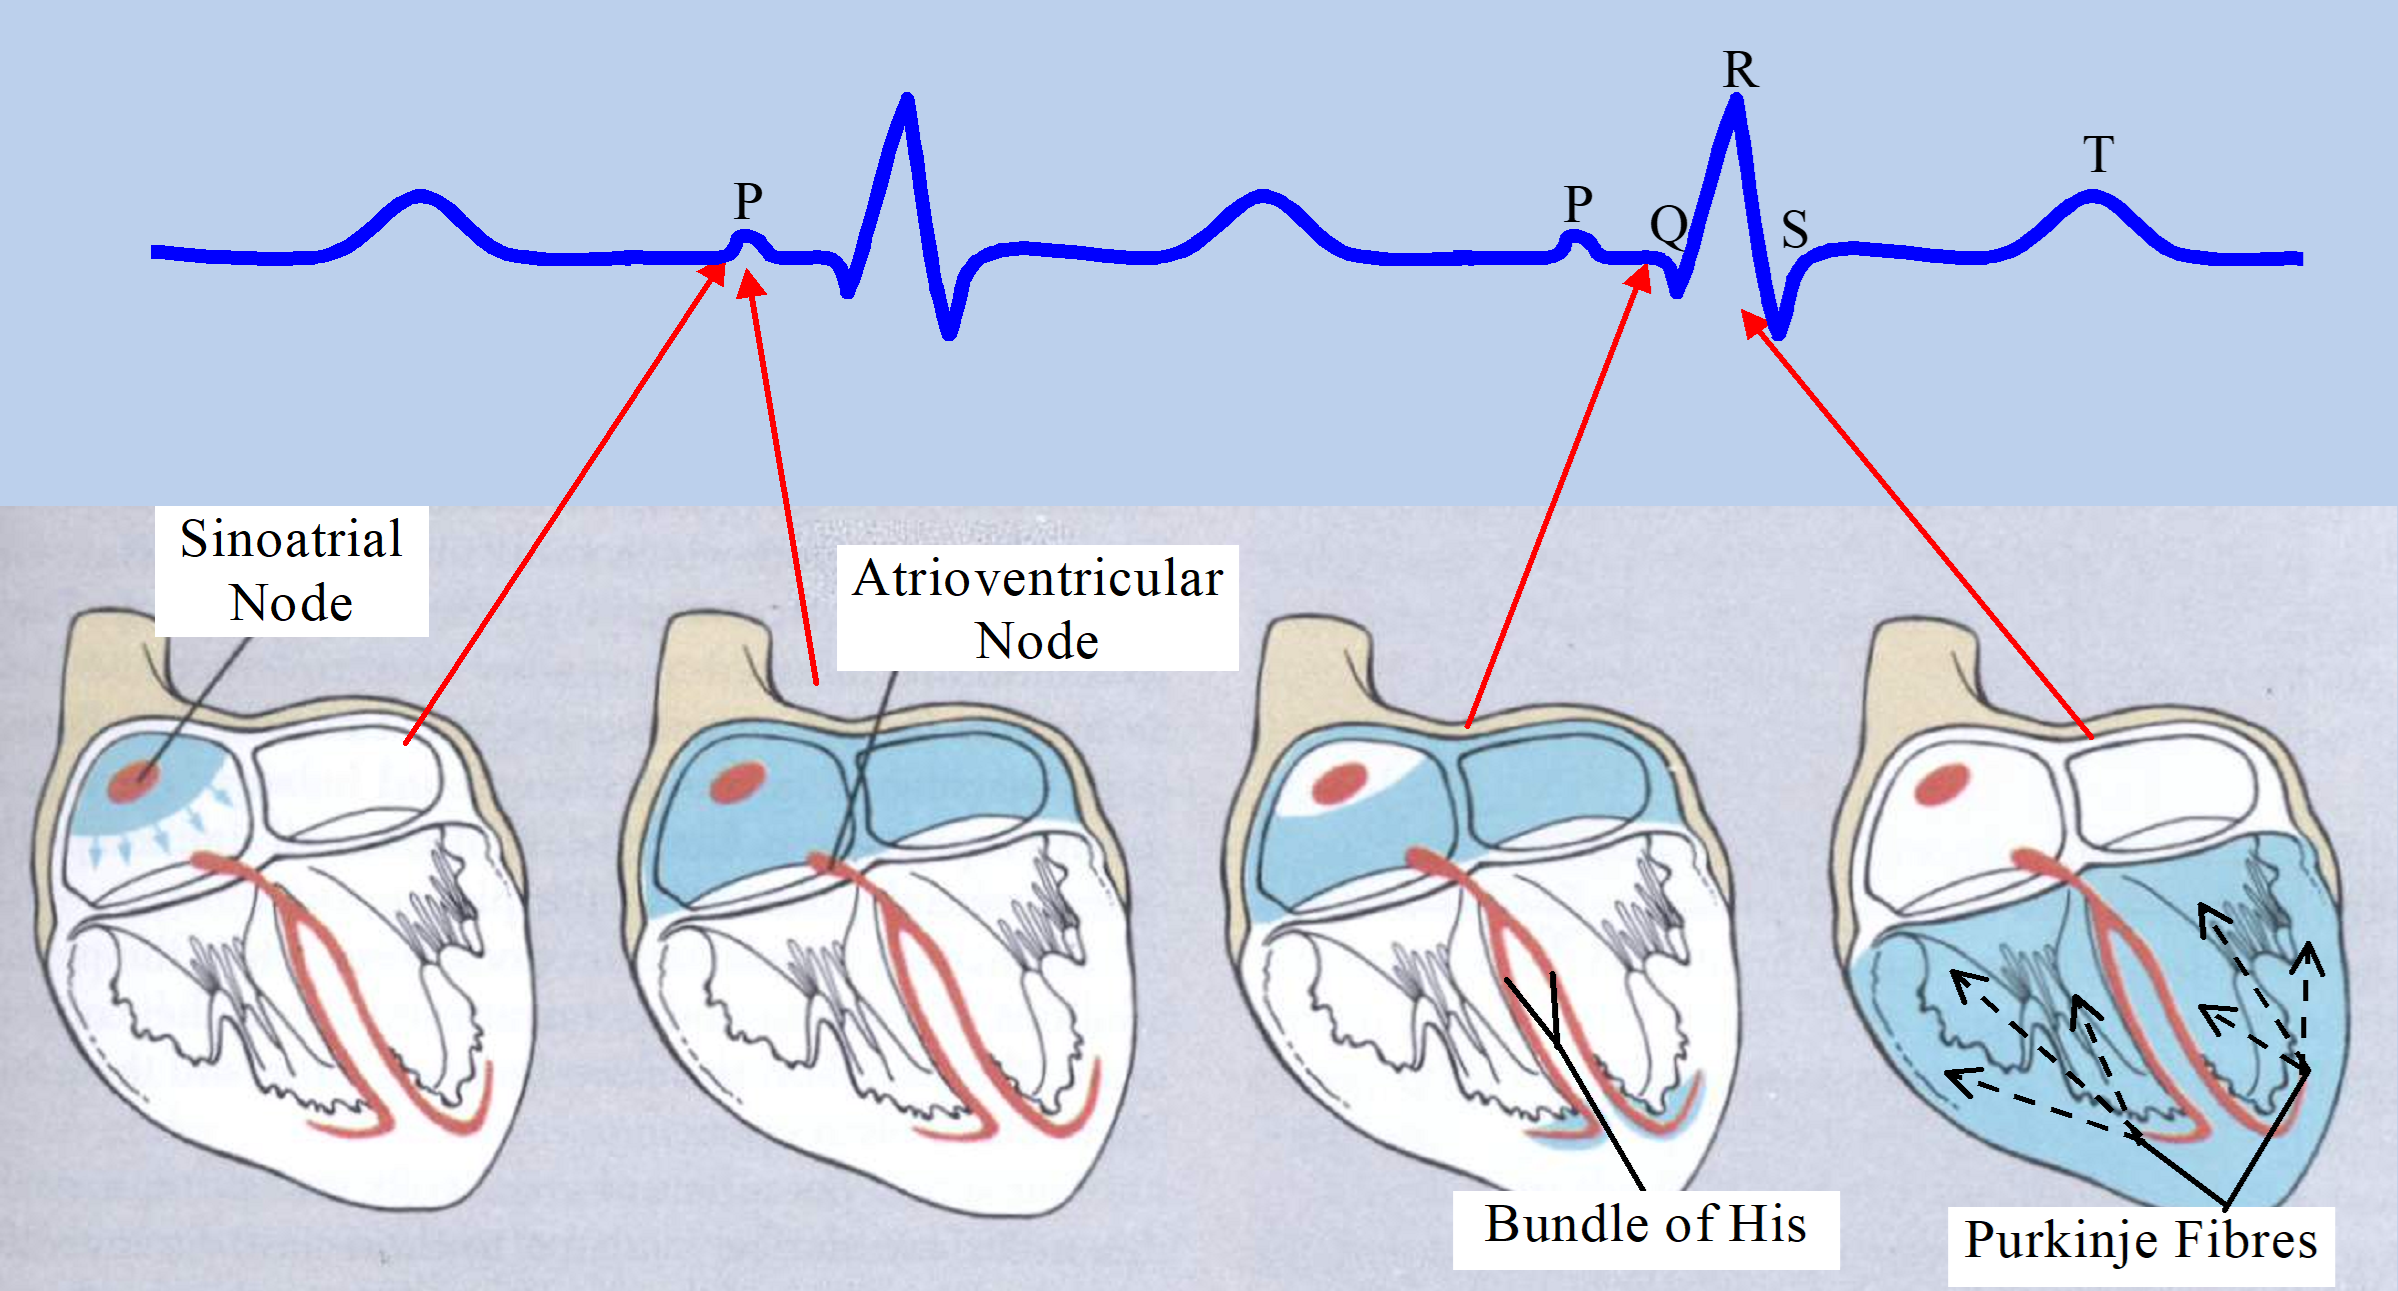 Electrical Conduction in the Heart